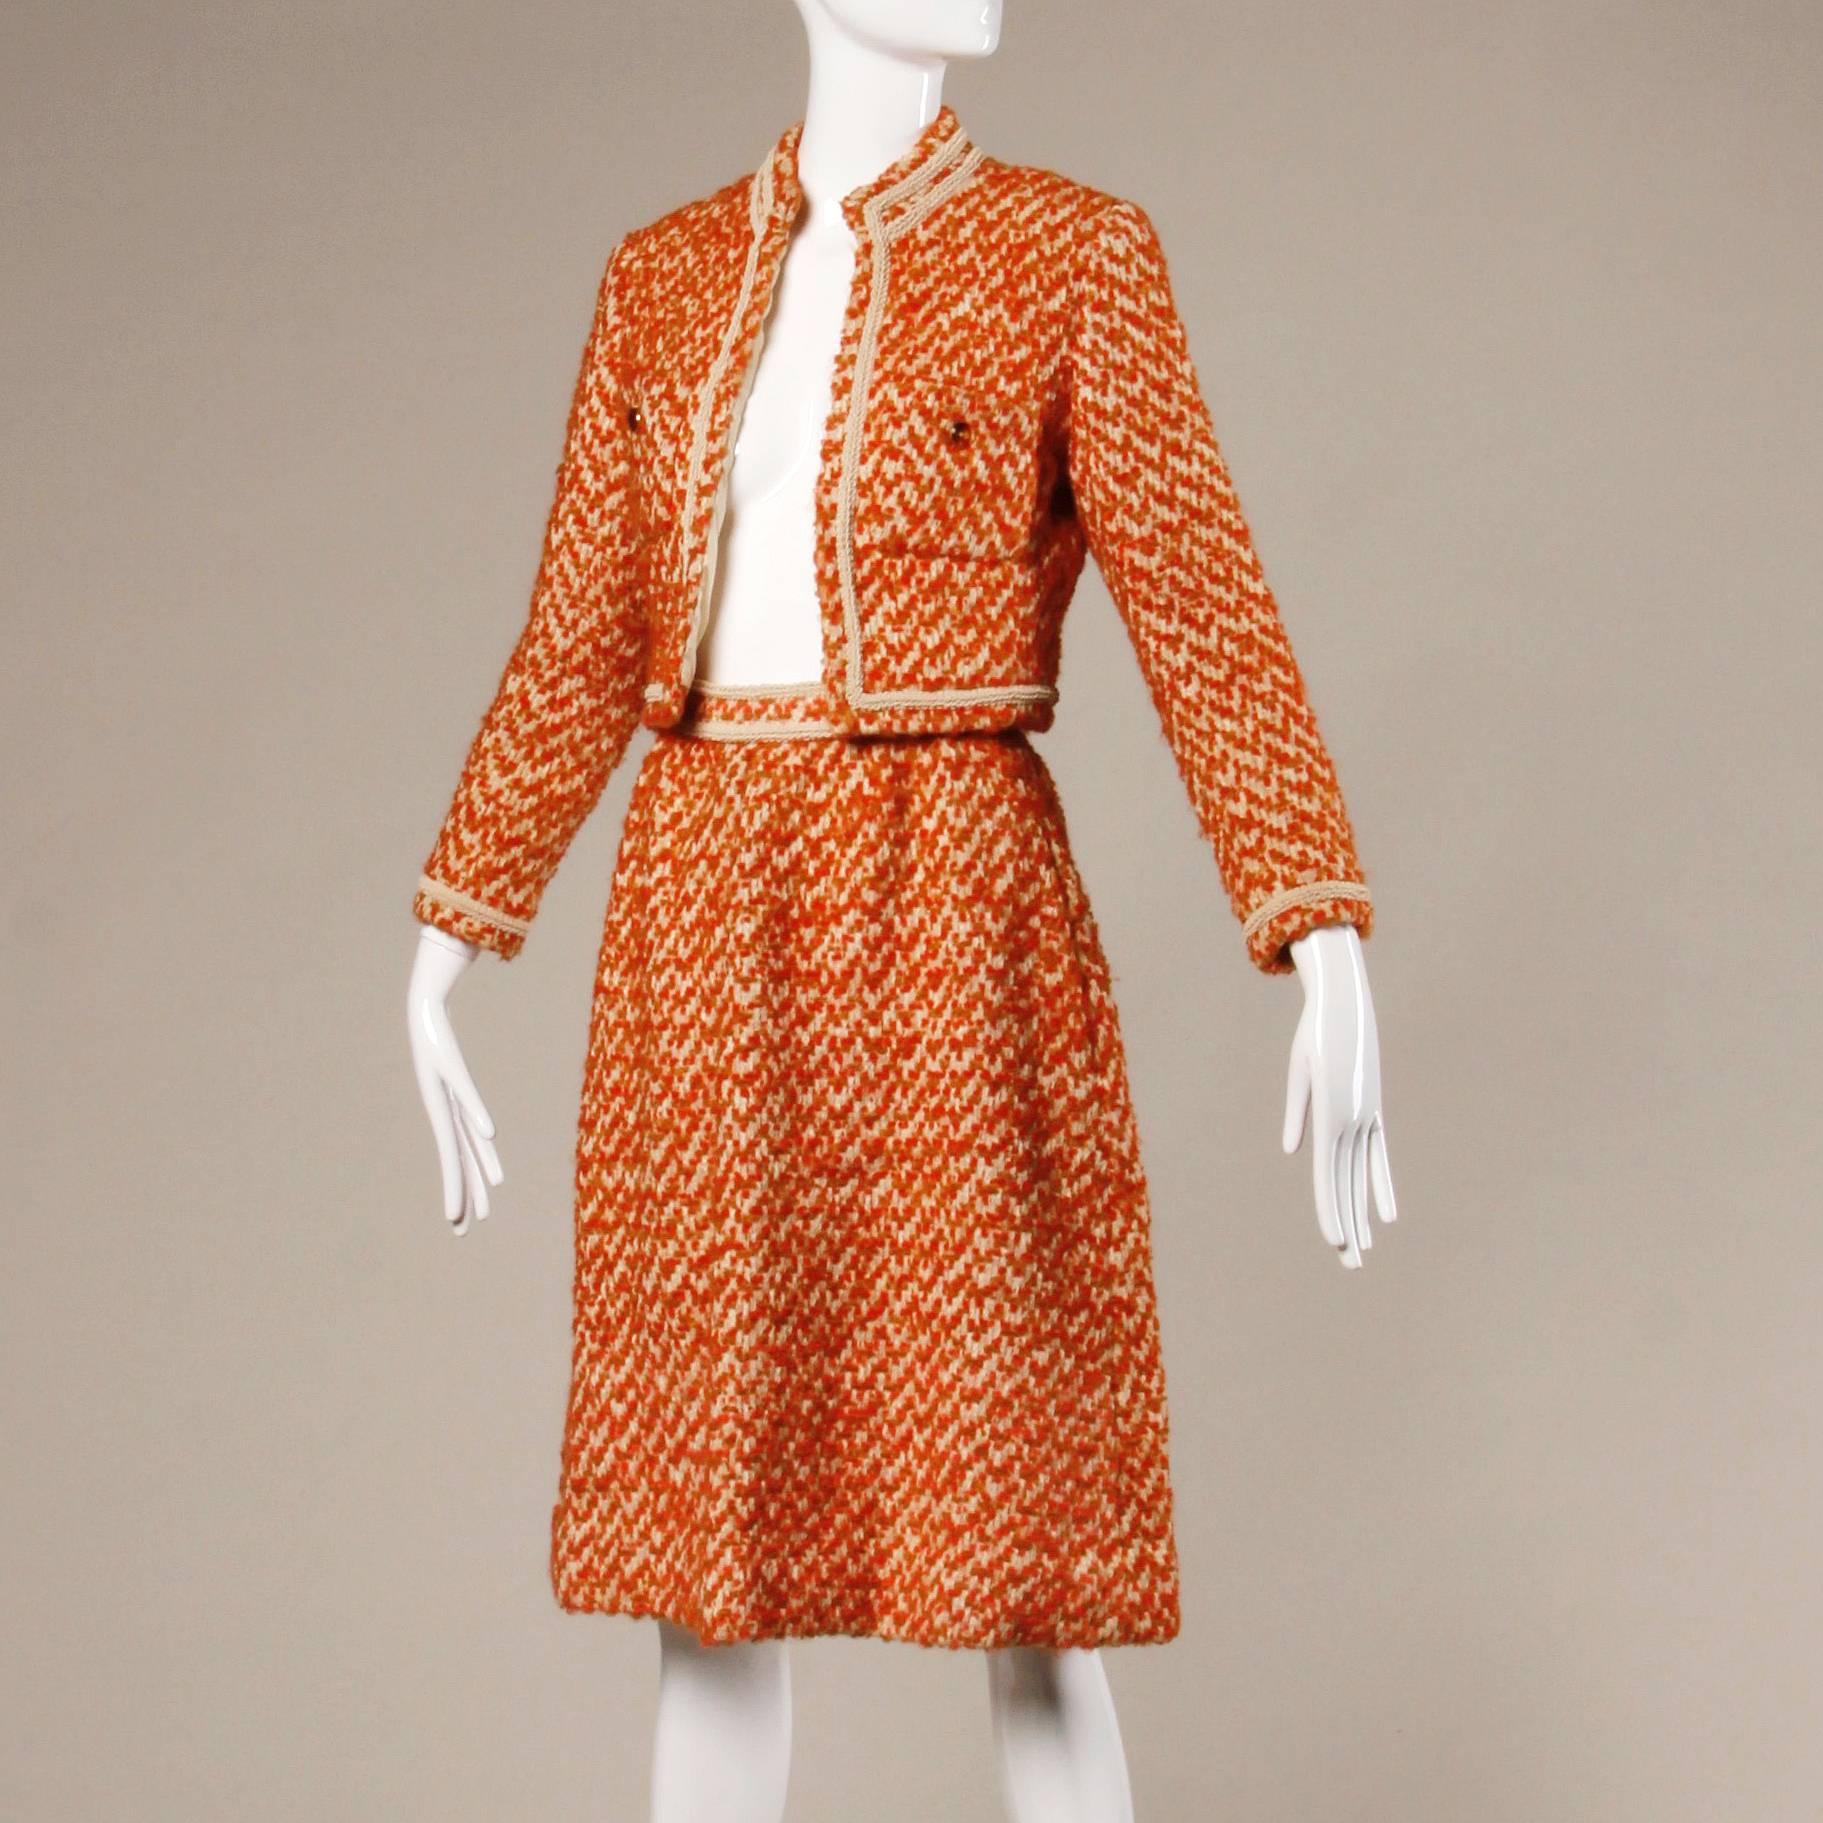 Stunning vintage couture jacket and skirt suit by Nina Ricci from the 1960s. Colorful boucle wool with creamy silk lining- every stitch sewn by hand! Gorgeous condition and tailoring.

Details:

Fully Lined in Silk
Front Pockets On Jacket/ Side